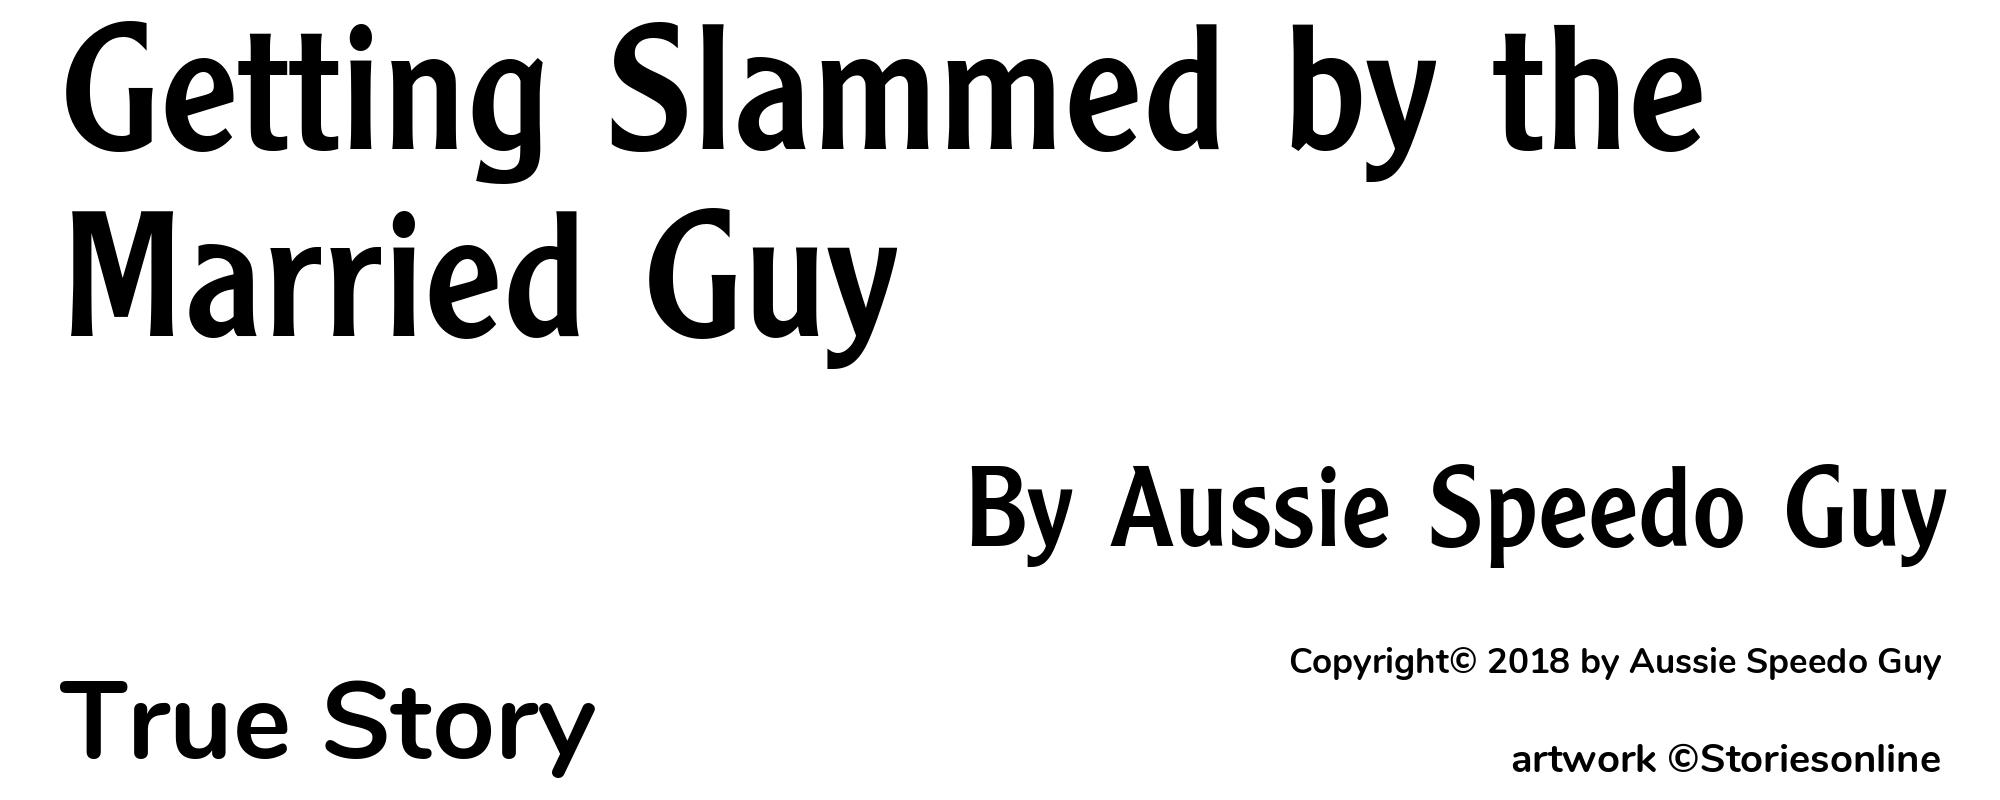 Getting Slammed by the Married Guy - Cover